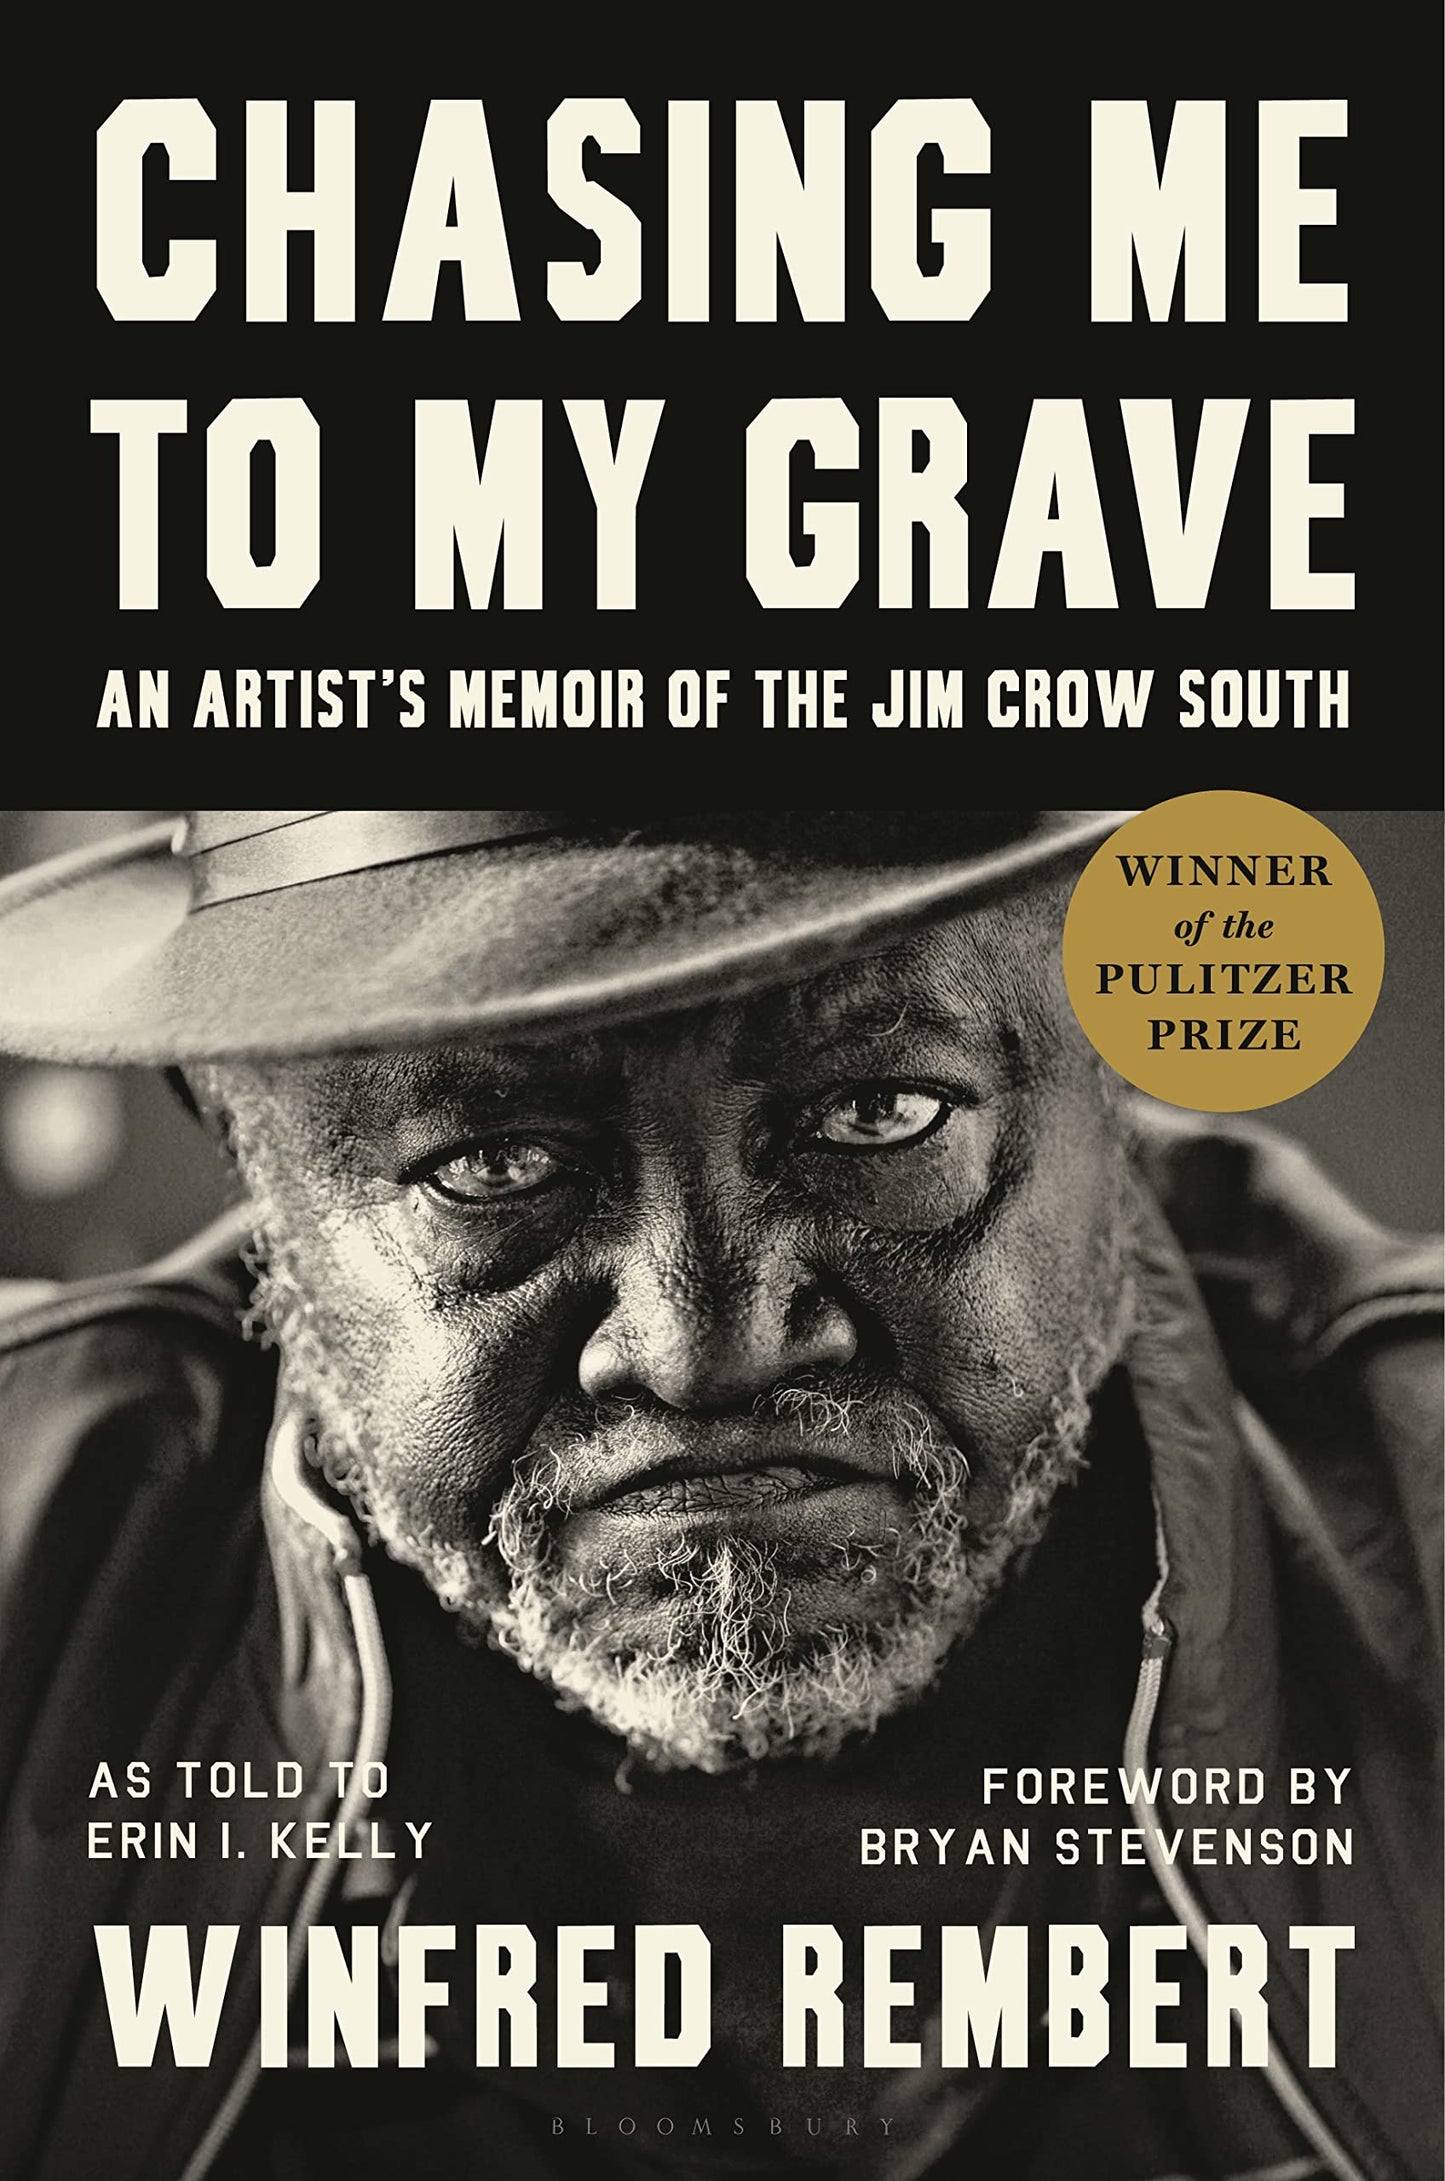 Chasing Me to My Grave // An Artist's Memoir of the Jim Crow South